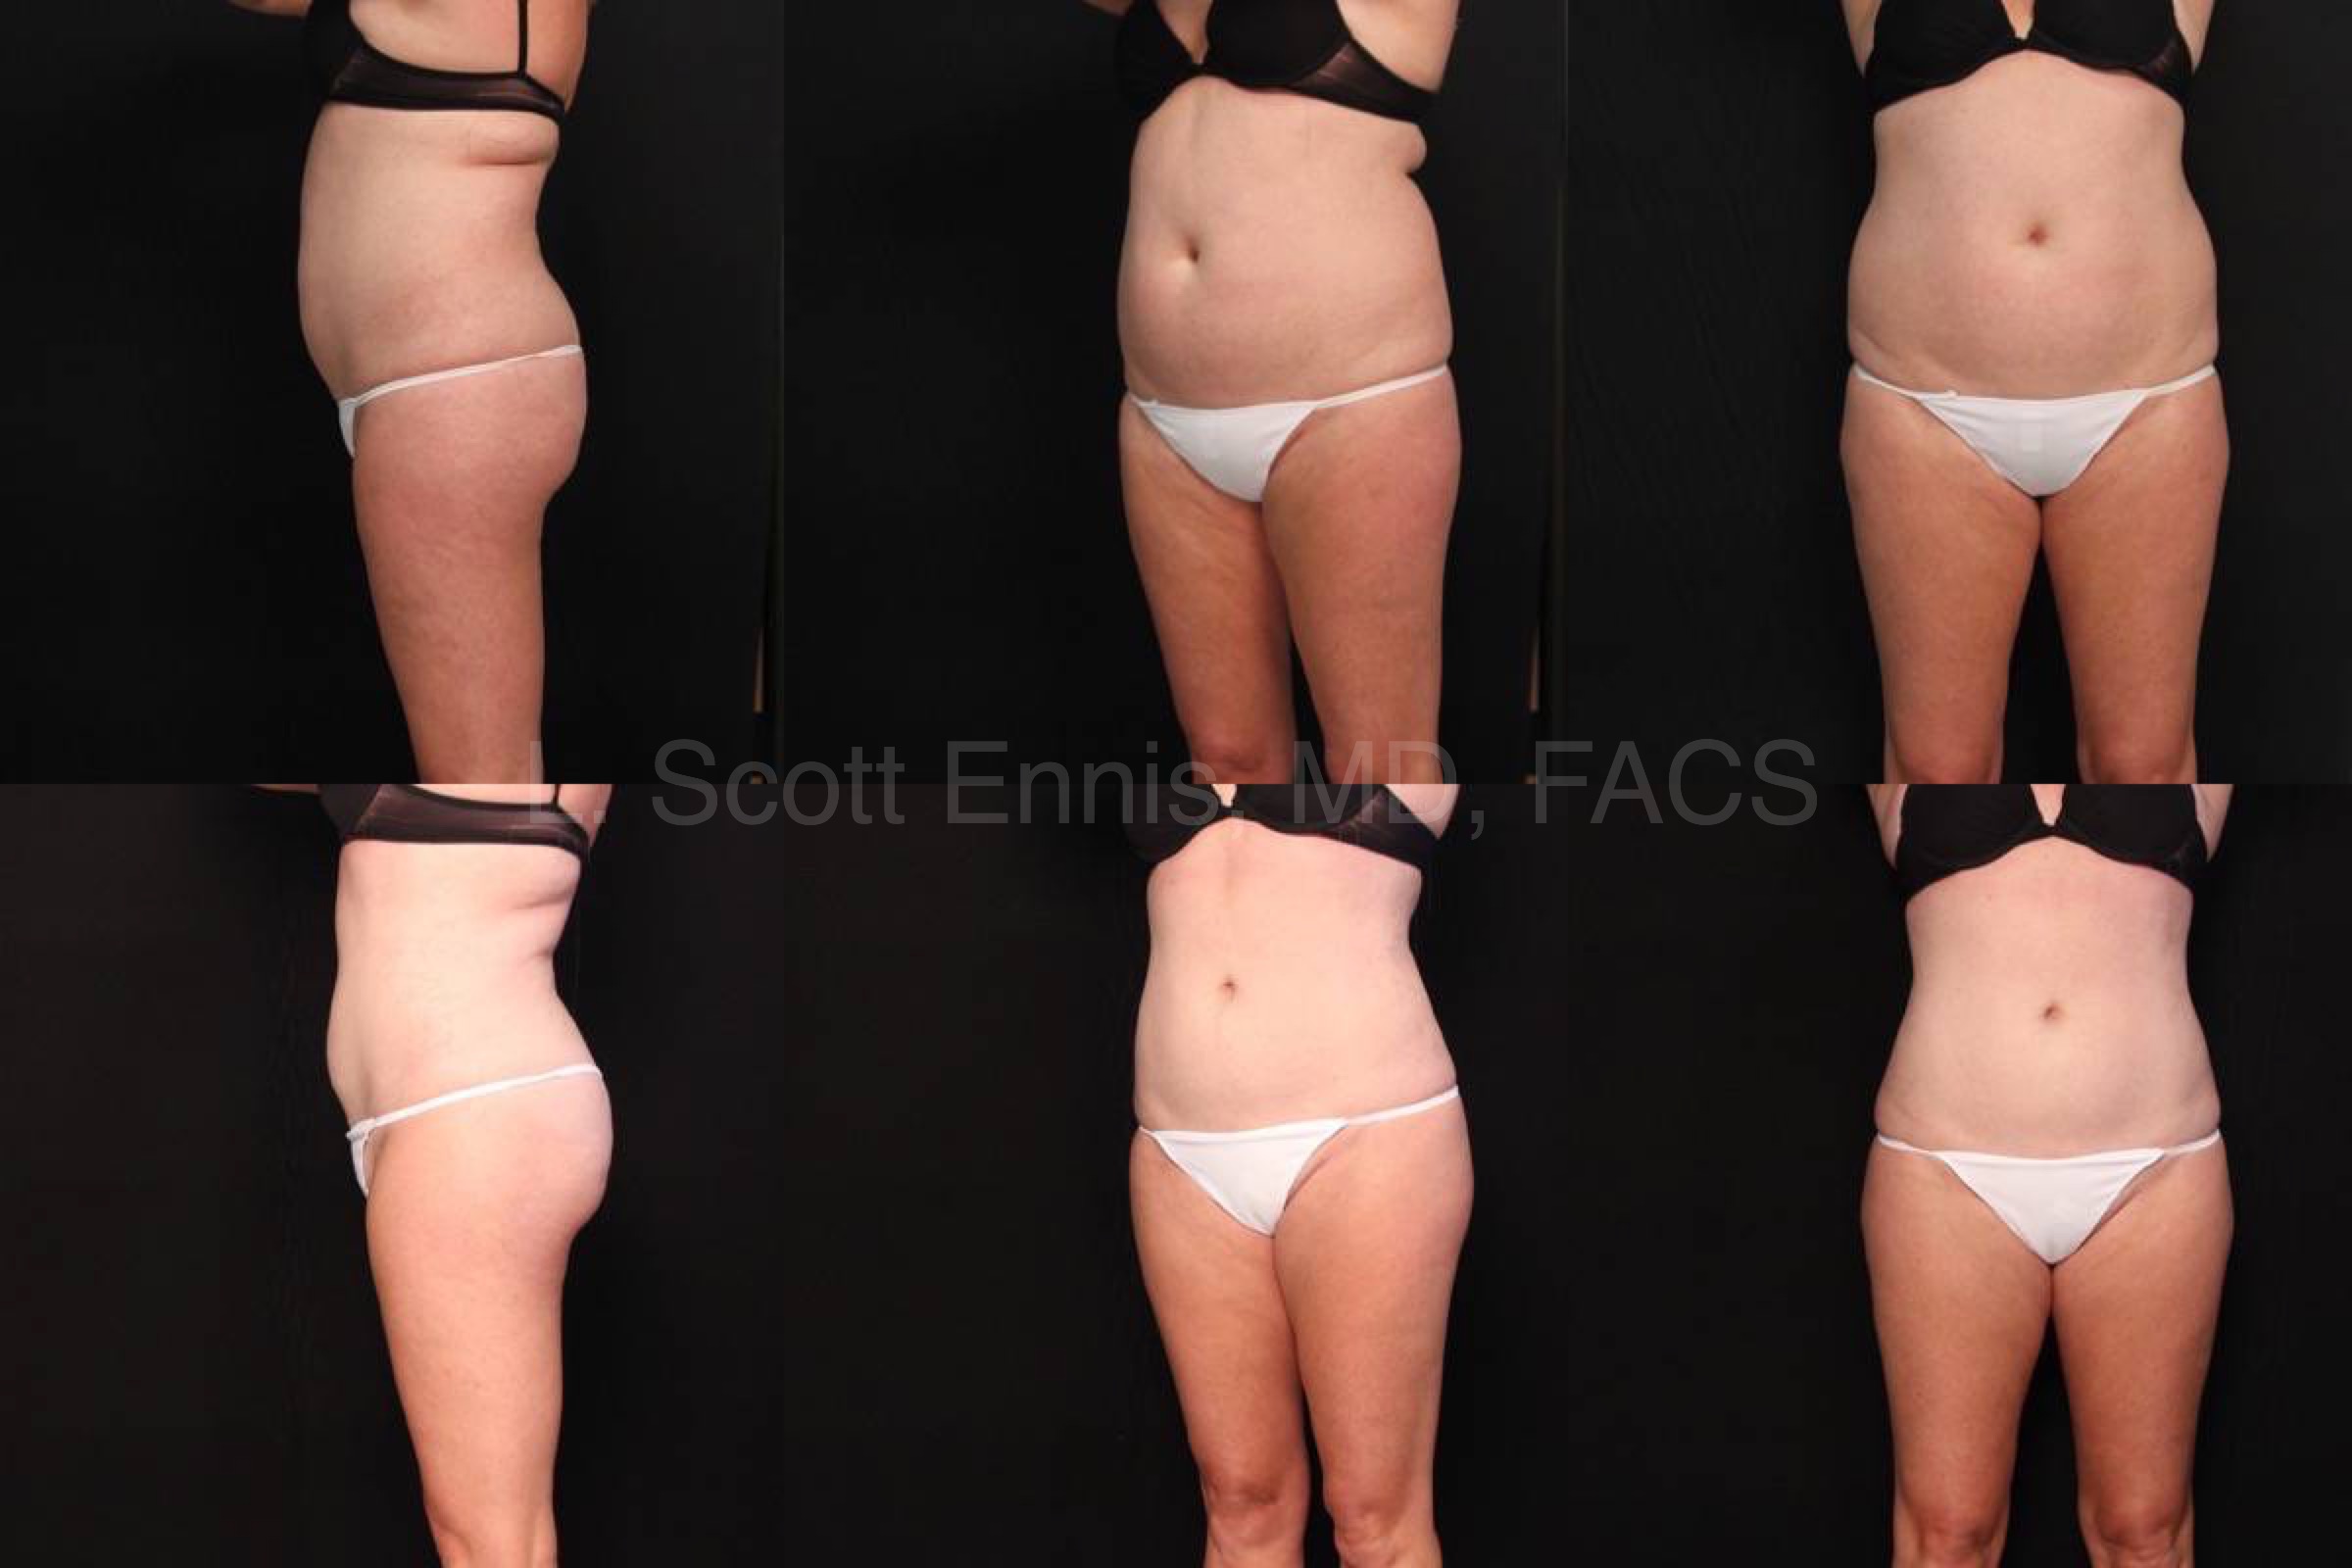 Liposuction of Abdomen and Hips Before and After Ennis Plastic Surgery Palm Beach Boca Raton Destin Miami